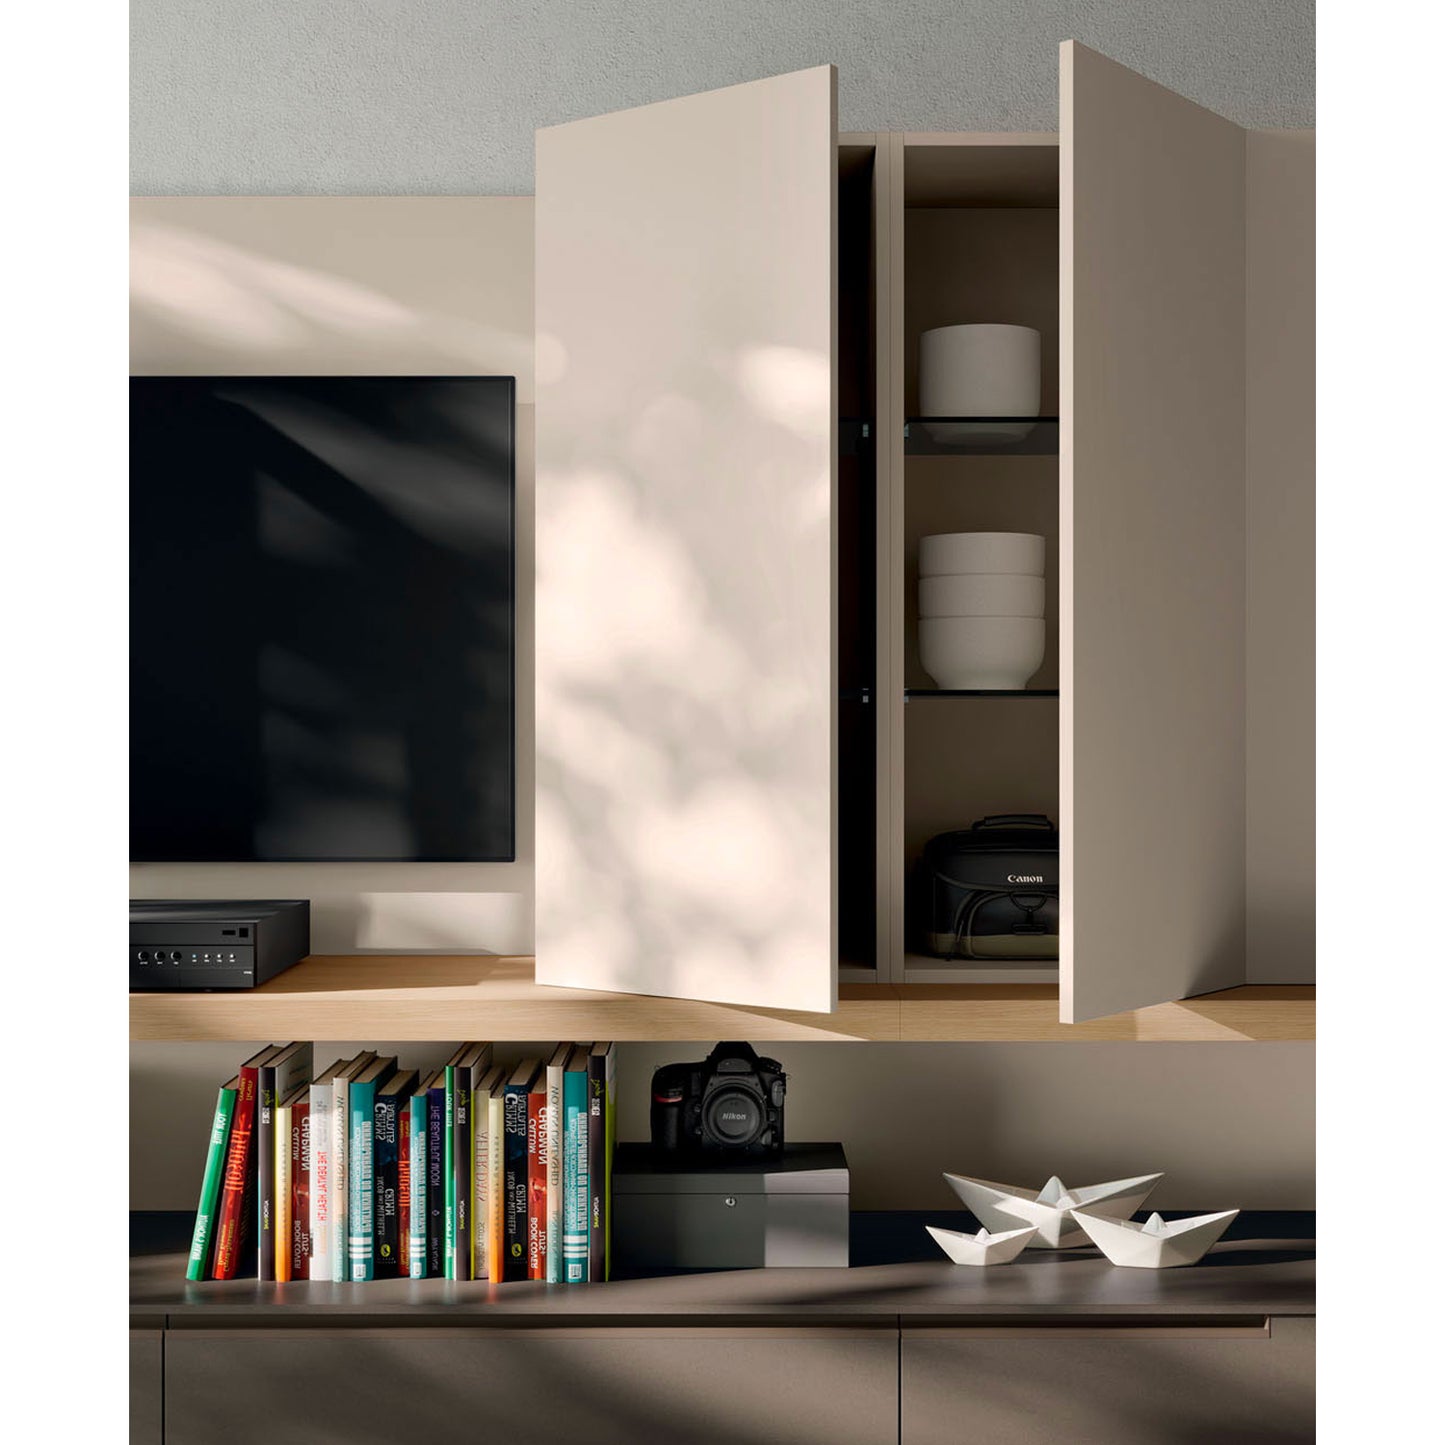 Light Day 22 TV Media with storage and glass doors by Orme Design